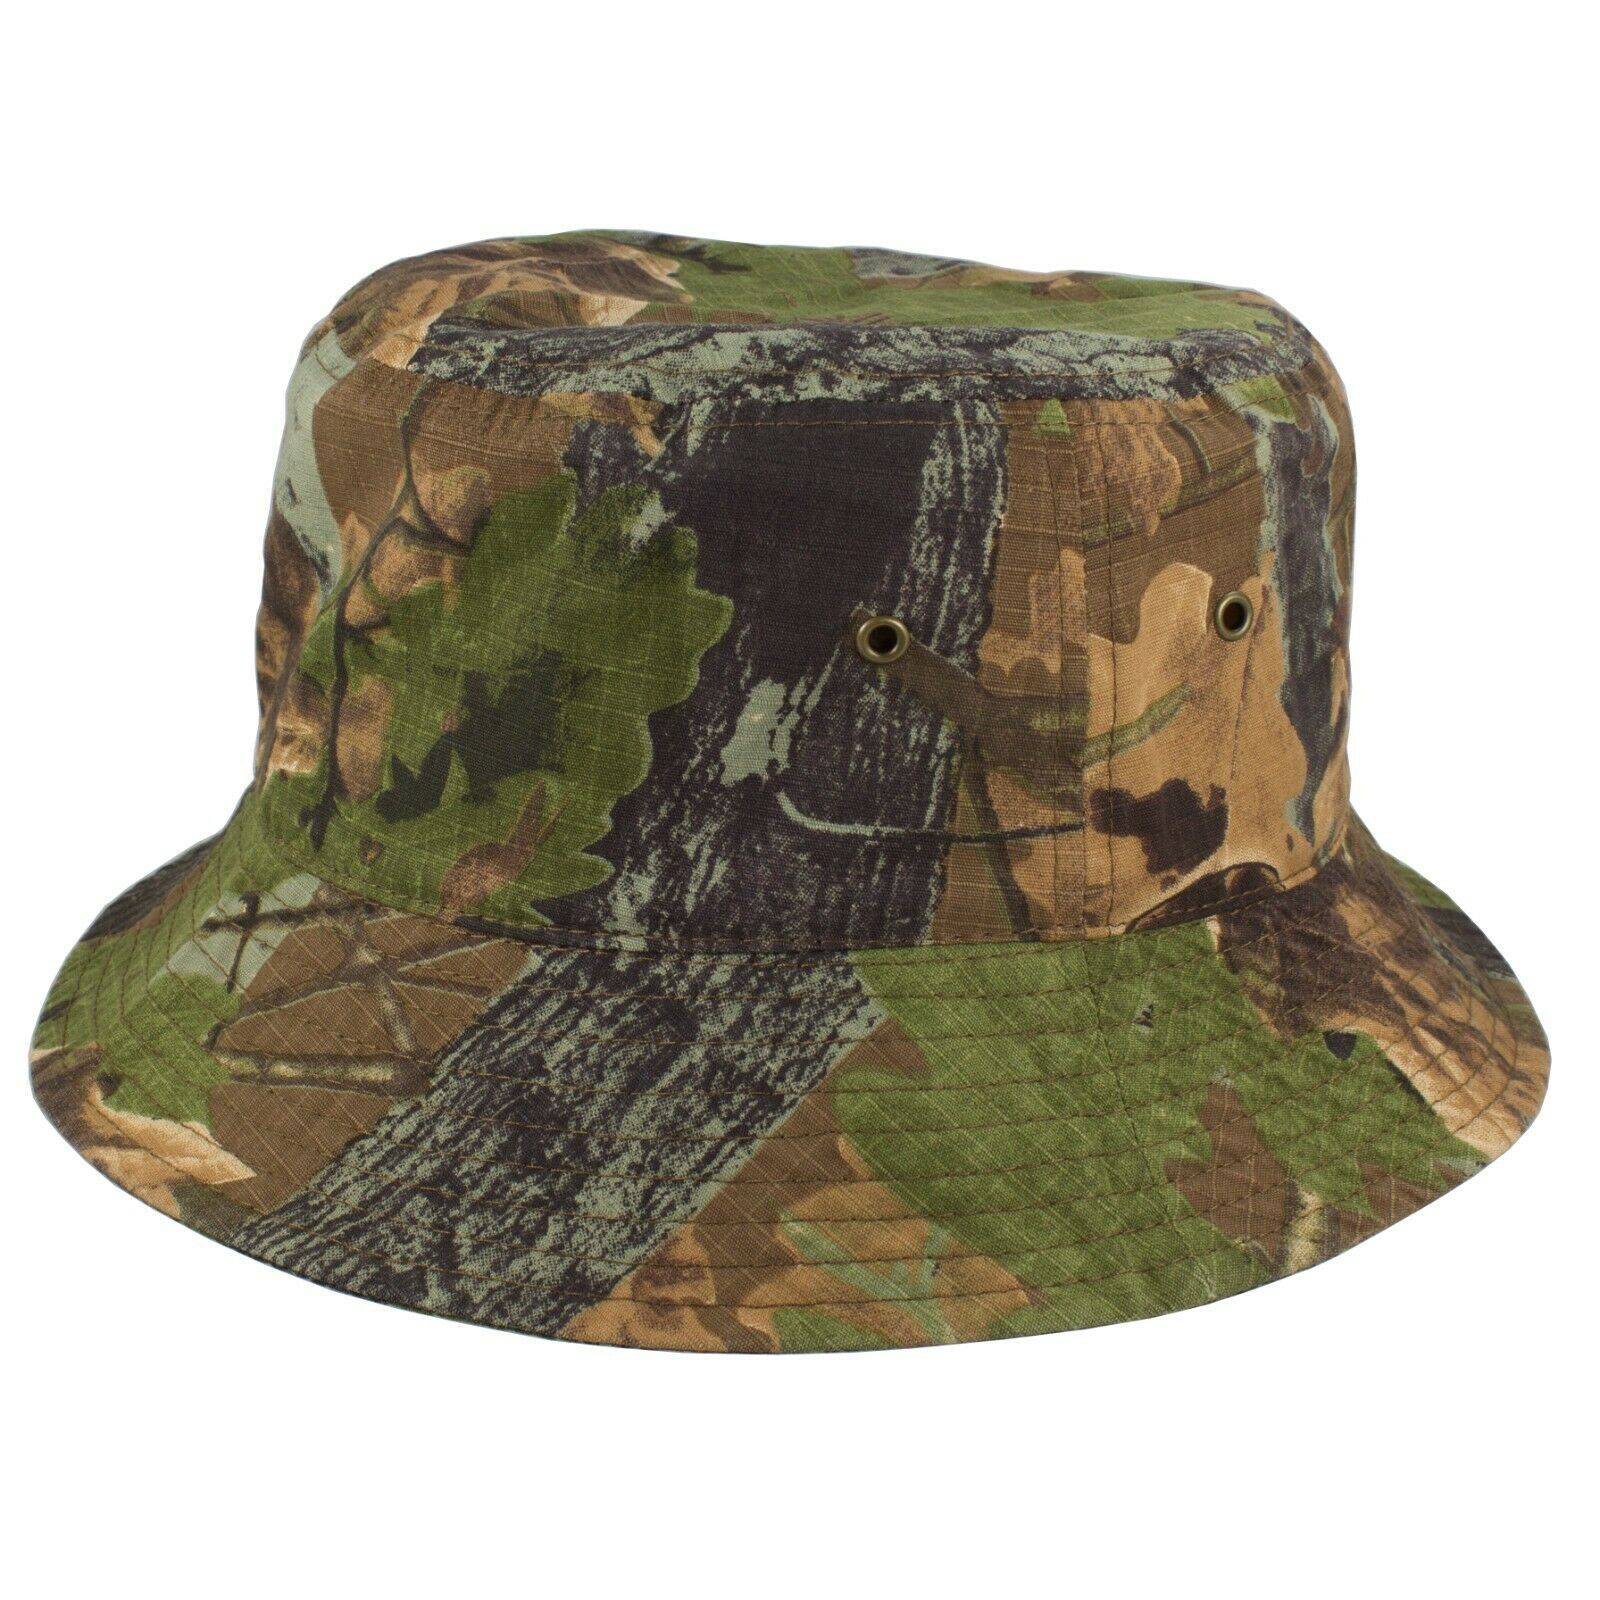 Primary image for Hunter Camo Hat Cap Bucket Cotton Military Fishing Camping Travel Summer